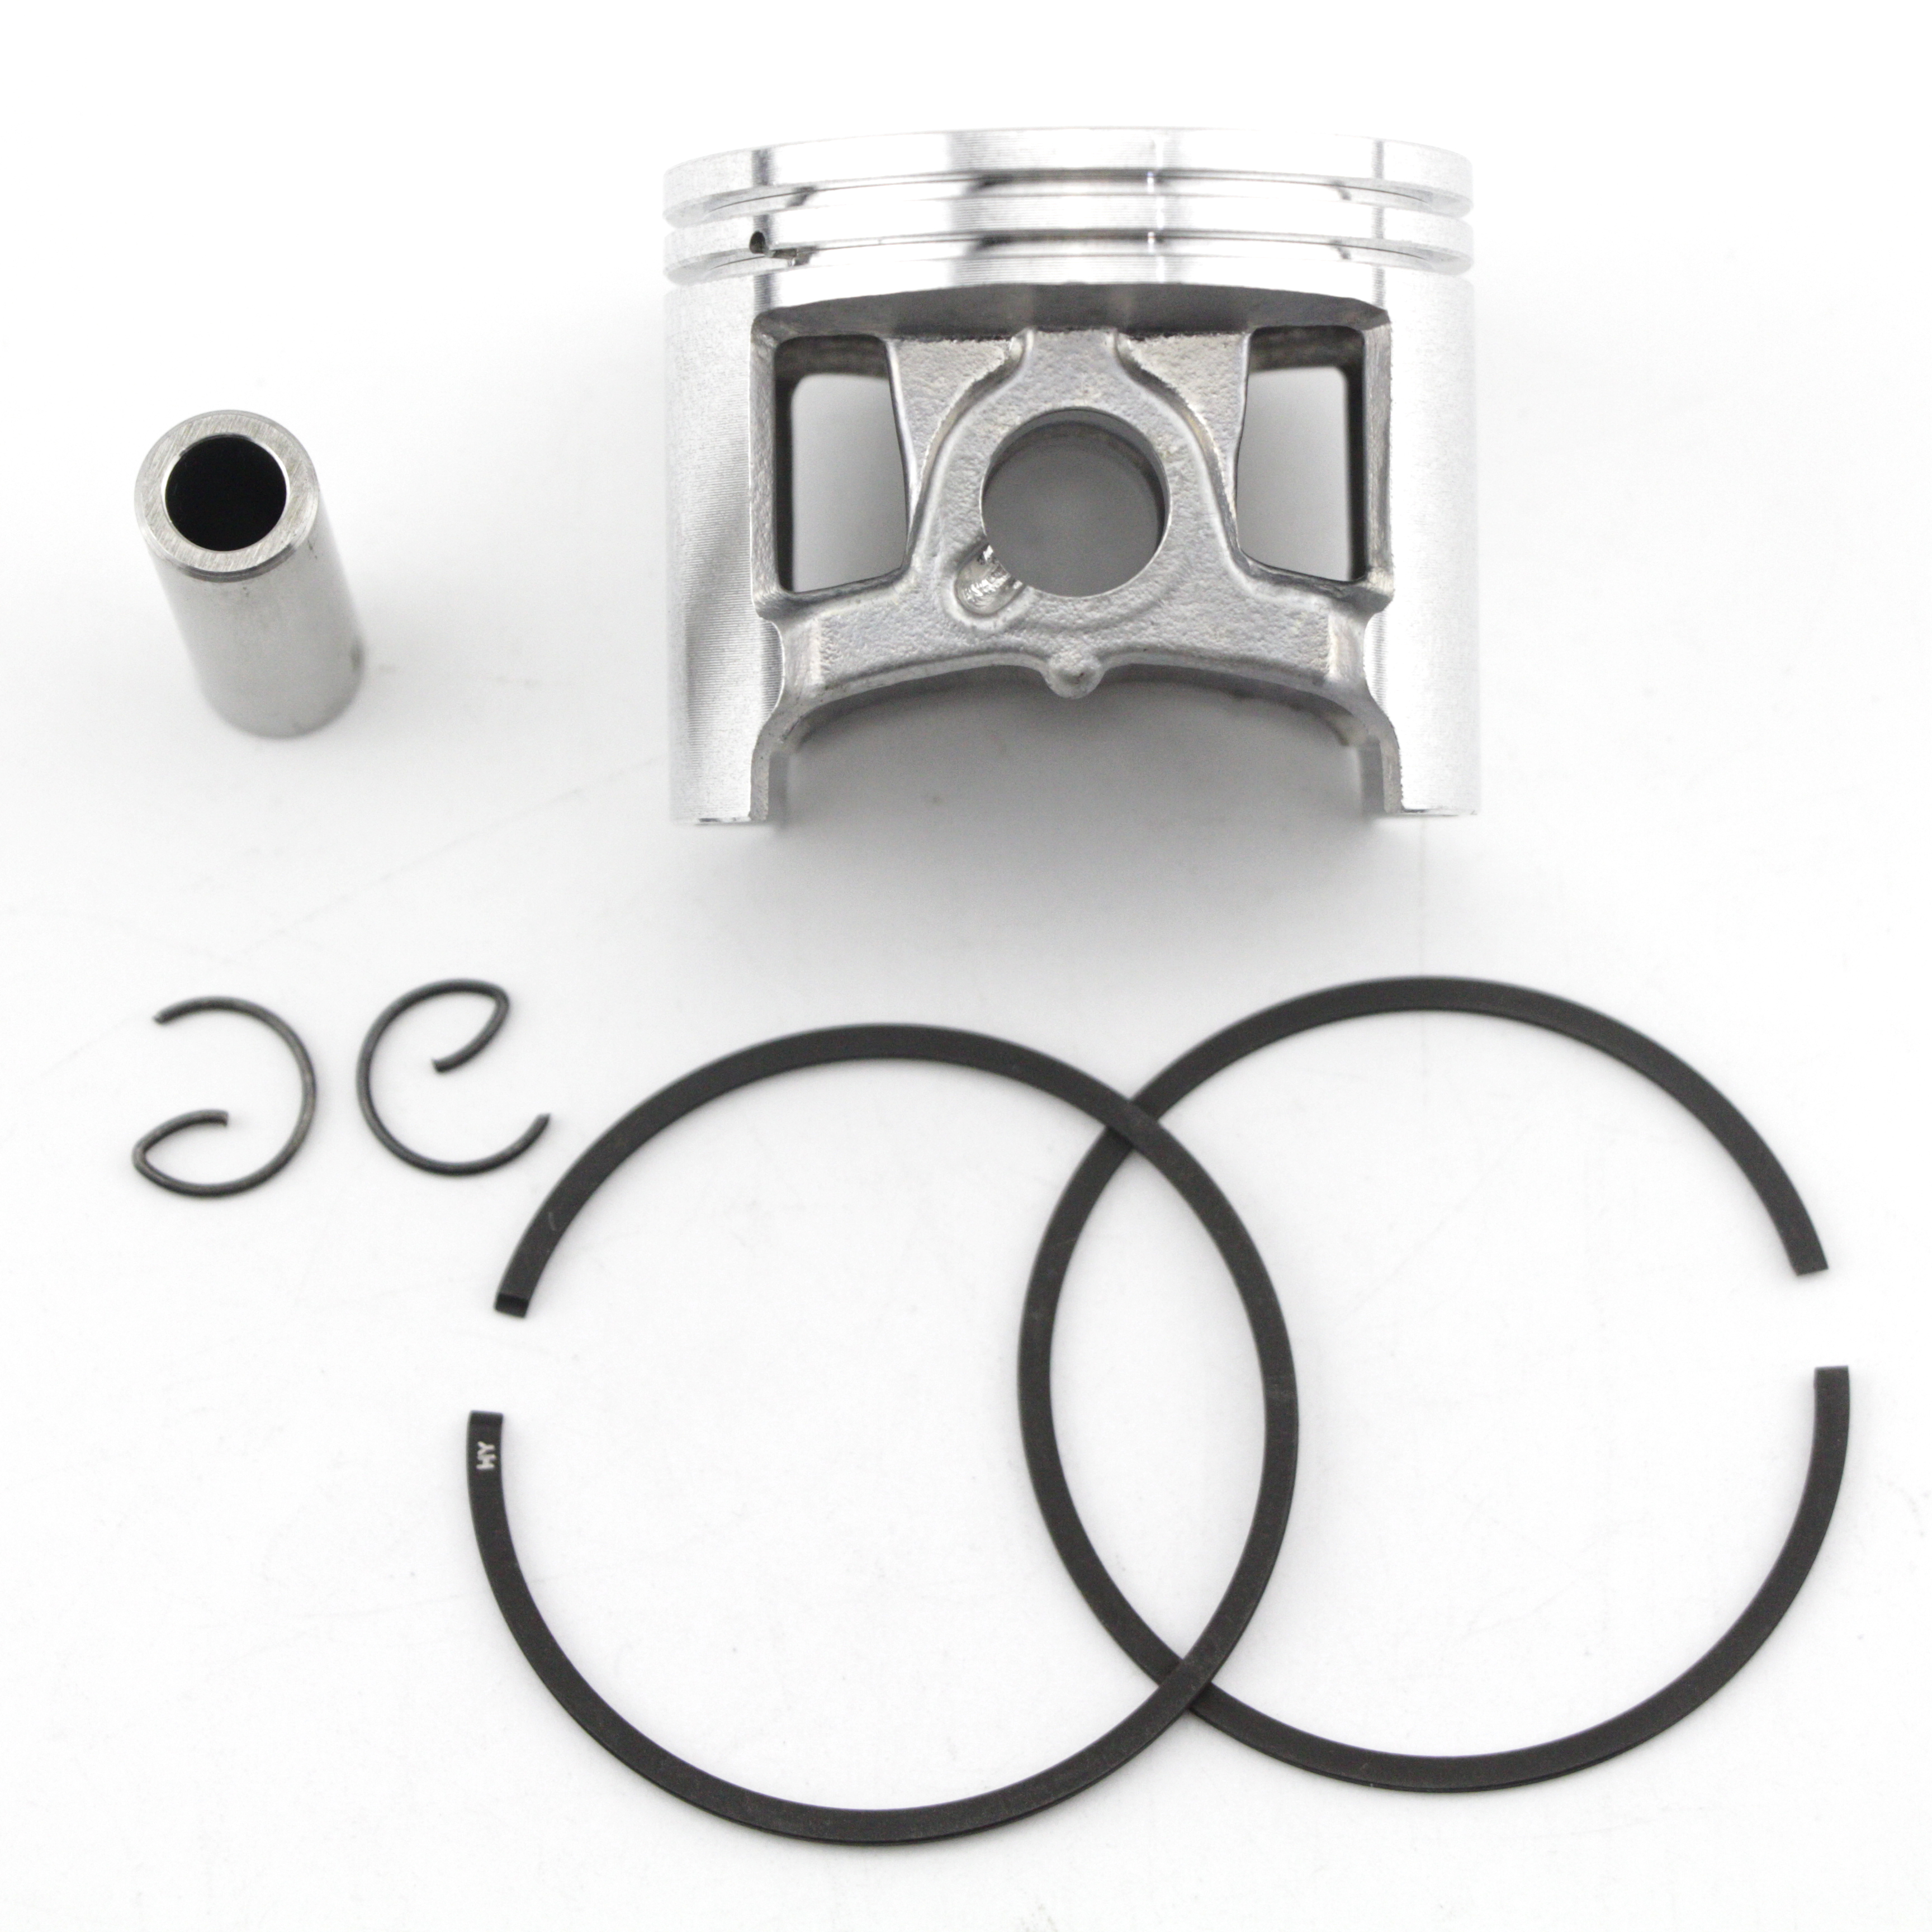 54MM Piston Kit with Rings Pin for Chainsaw STIHL 066 MS660 OEM 1122 030 2005 